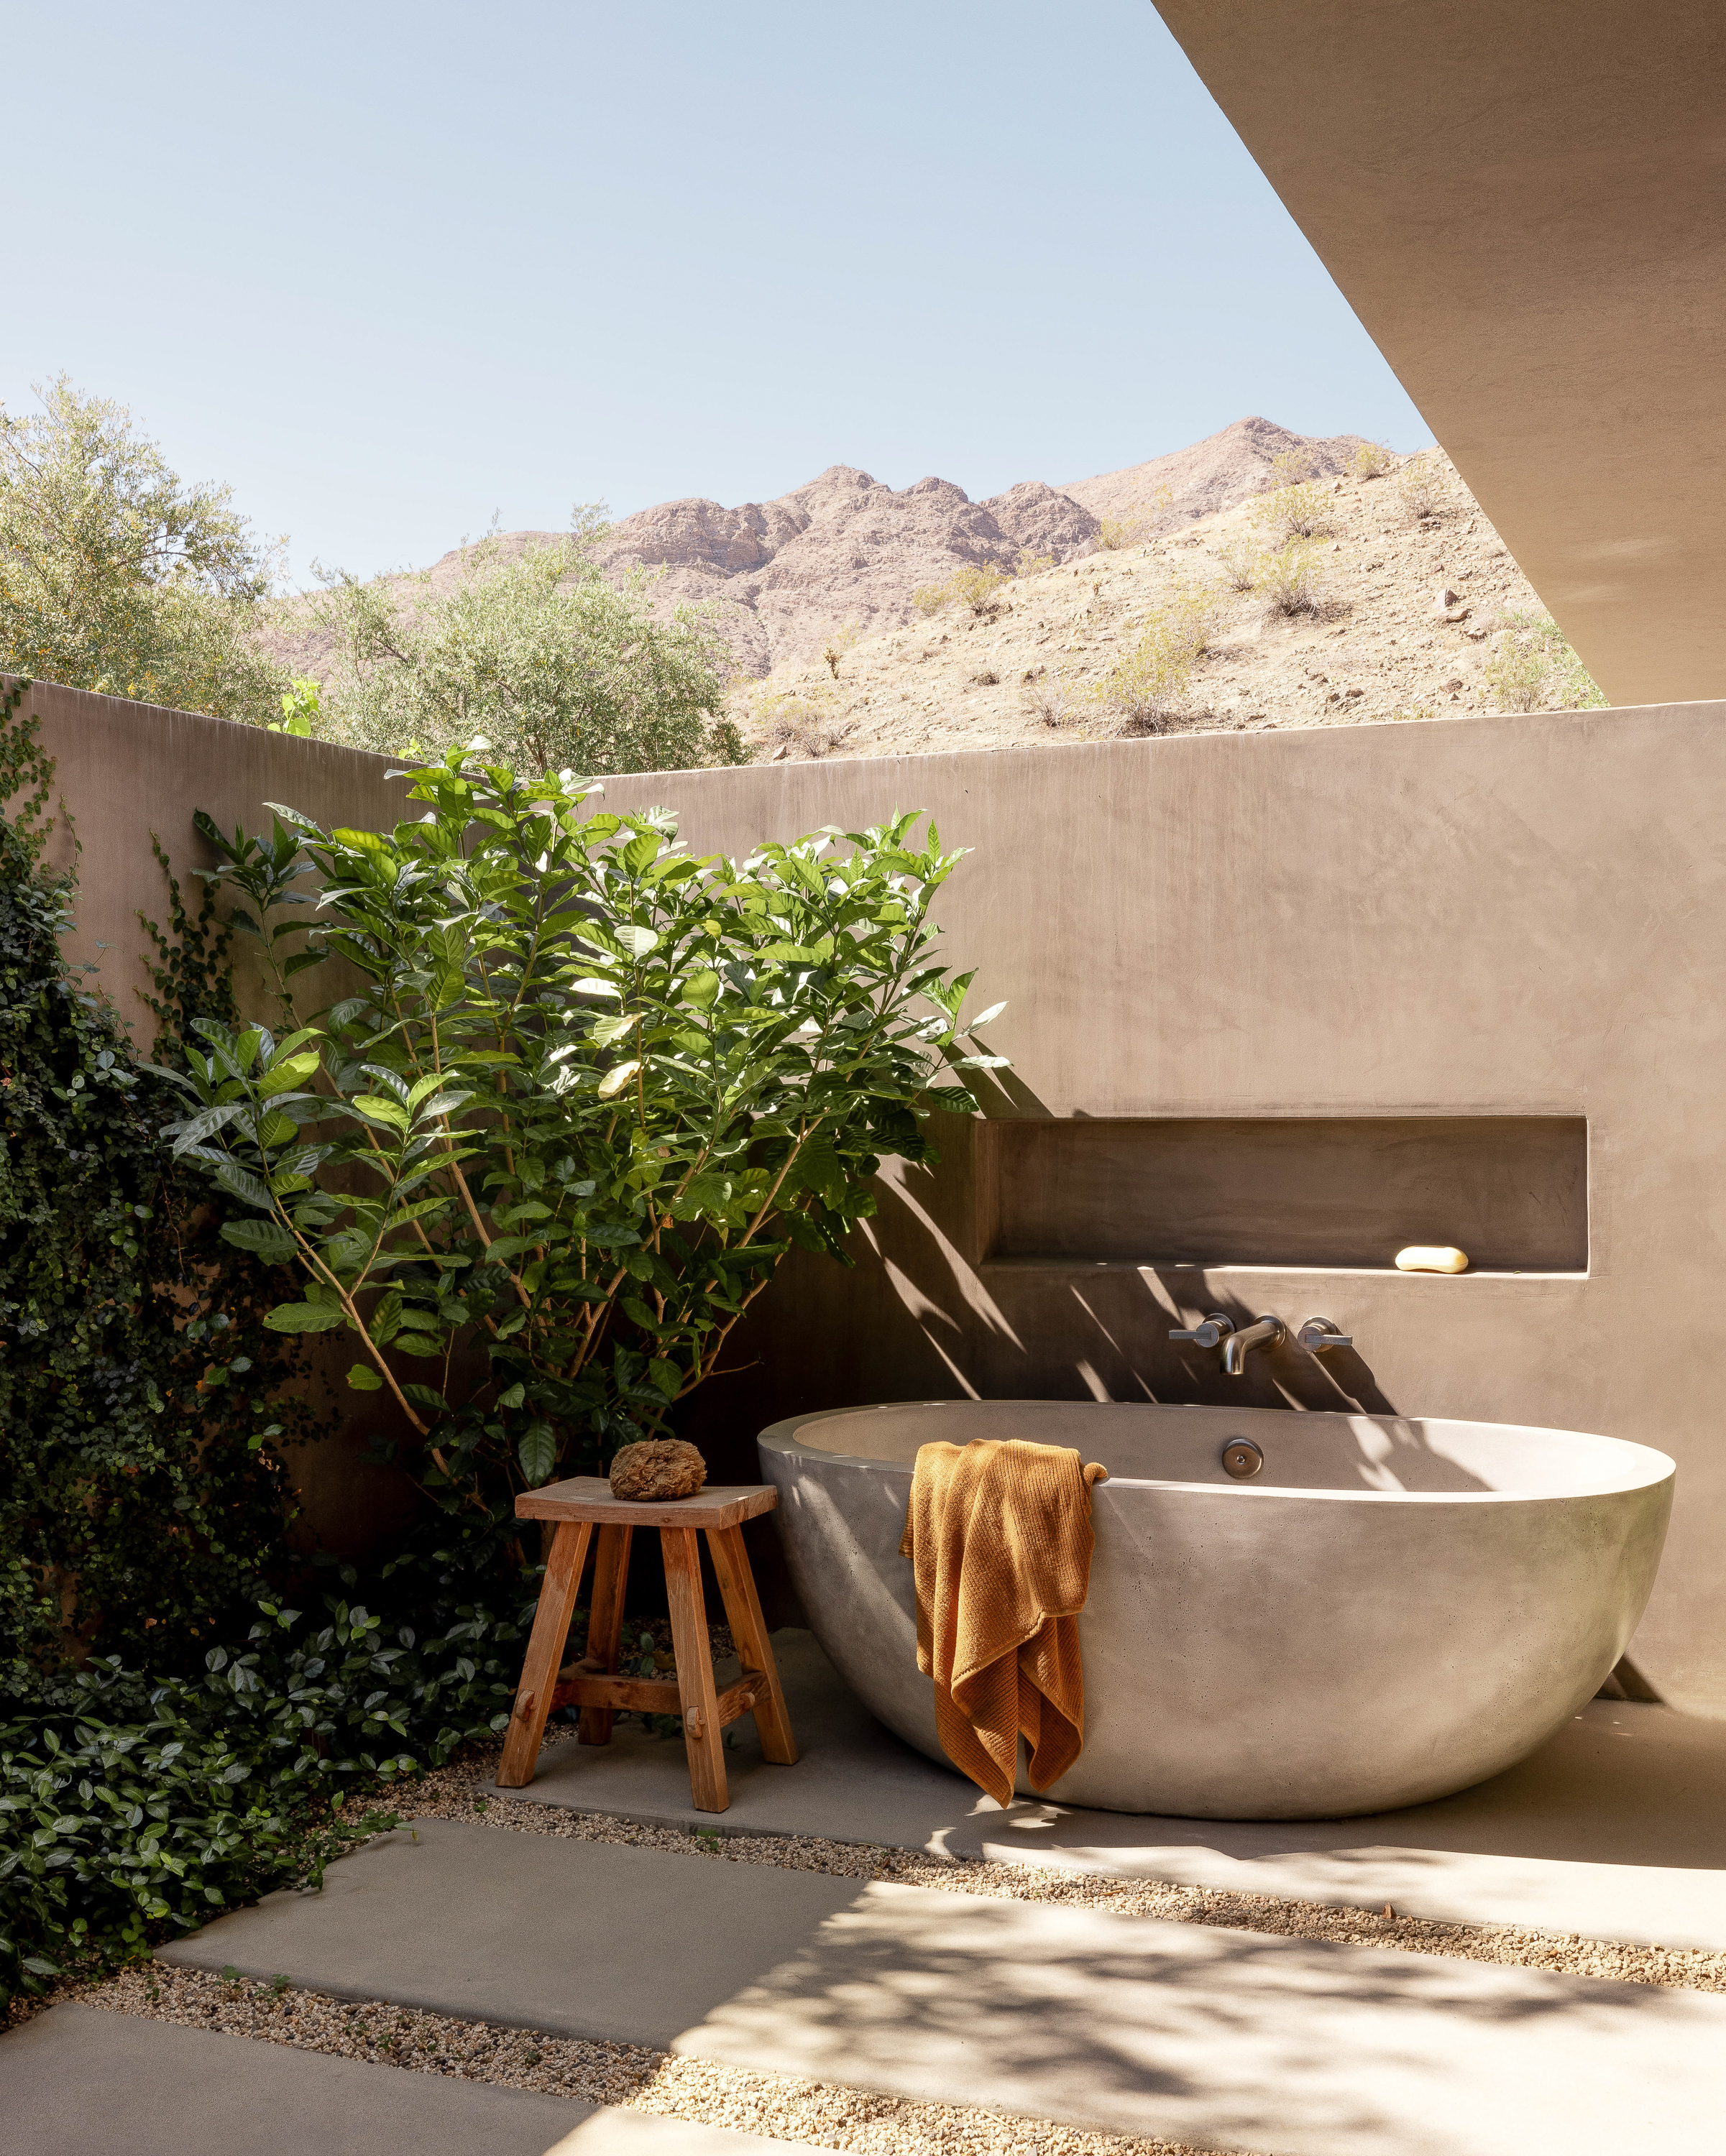 Outdoor bathtub at Palm Springs Retreat: A luxurious escape with mountain views, offering a serene and indulgent bathing experience under the open sky.